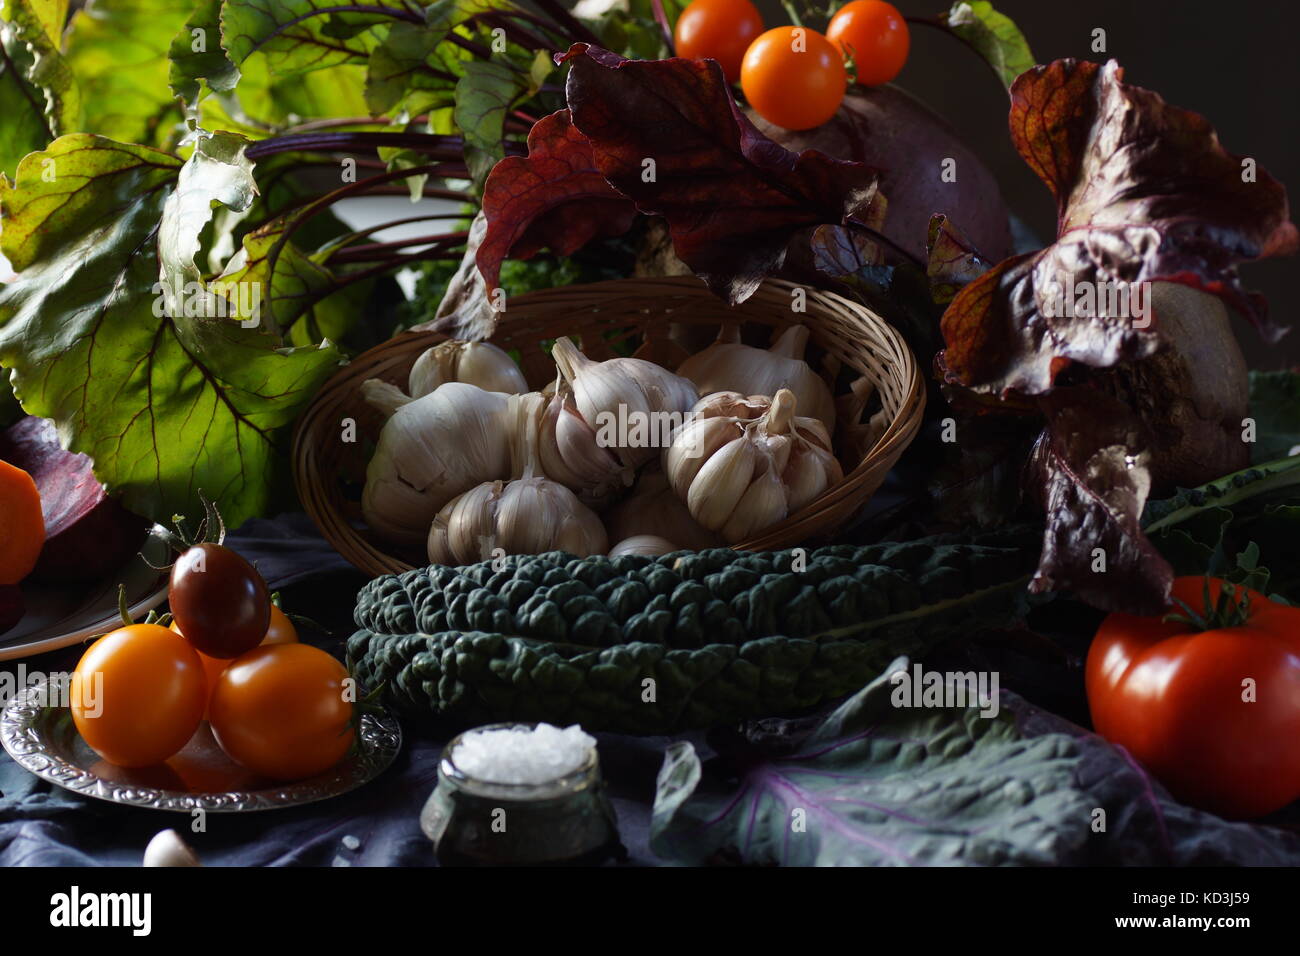 Still life: basket with garlic, tomatoes, kale leaves, Brussels red cabbage and salt among the greens on the table. Stock Photo